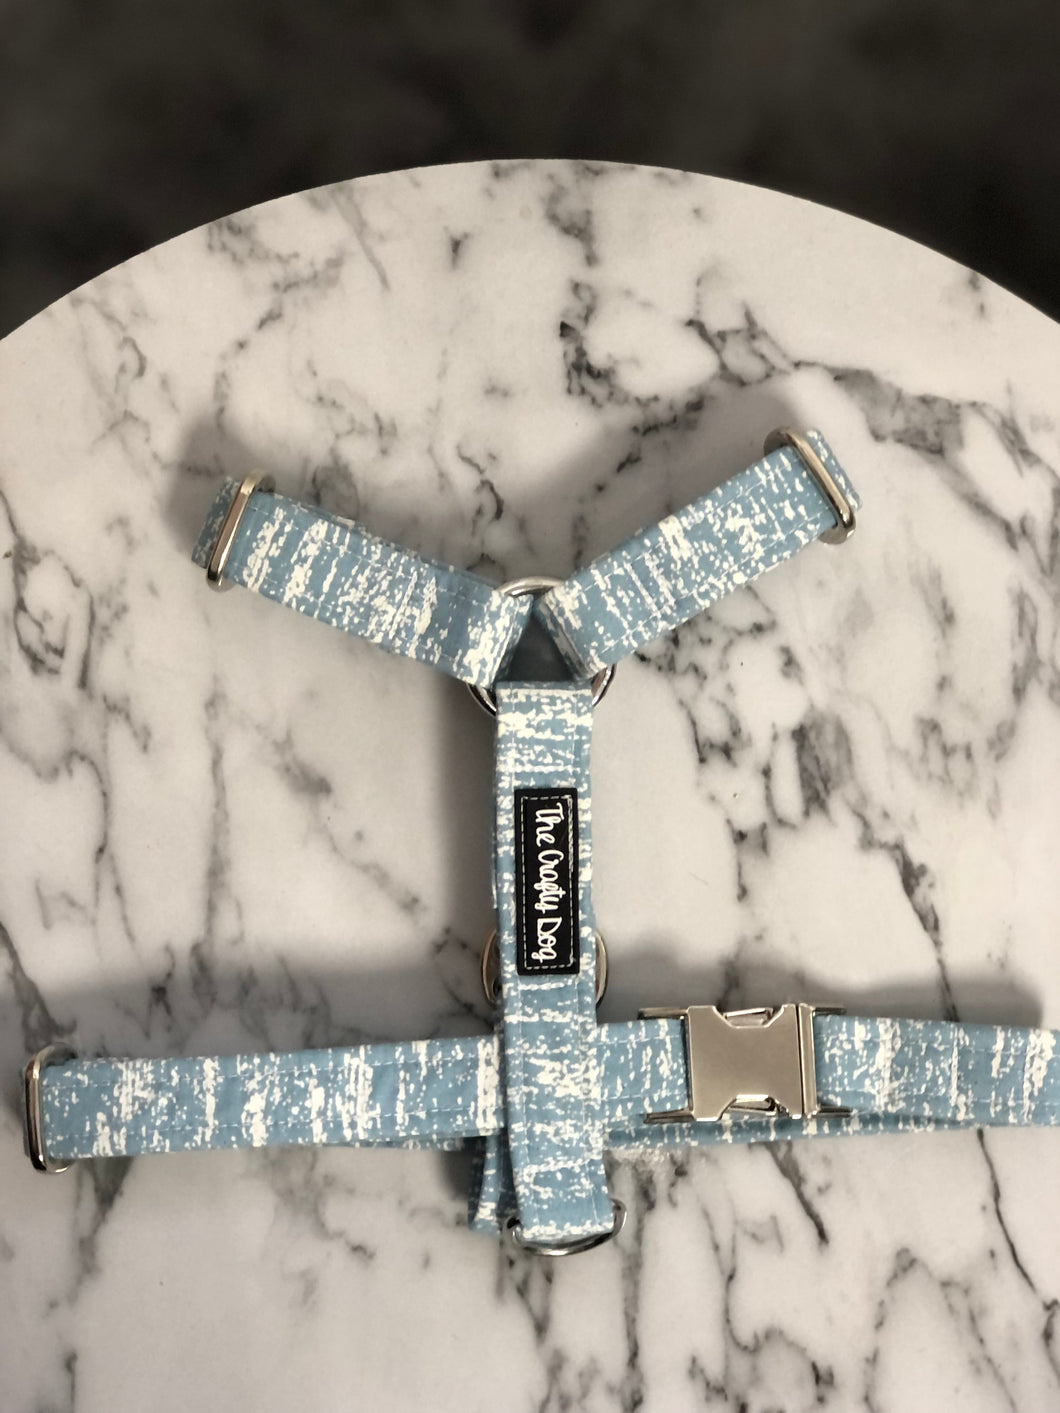 Ready To Ship Strap Harness - Size Small - Baby Blue Brush